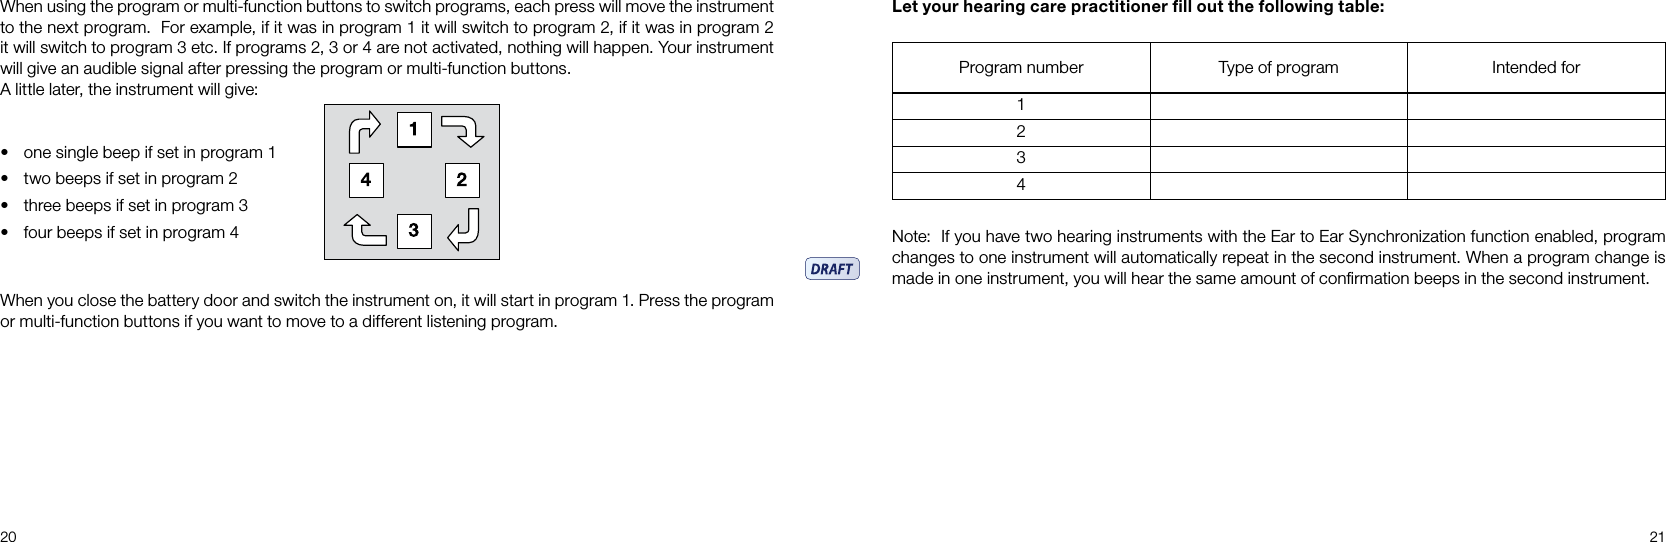 20 21Program number Type of program Intended for1234When using the program or multi-function buttons to switch programs, each press will move the instrument to the next program.  For example, if it was in program 1 it will switch to program 2, if it was in program 2 it will switch to program 3 etc. If programs 2, 3 or 4 are not activated, nothing will happen. Your instrument will give an audible signal after pressing the program or multi-function buttons. A little later, the instrument will give:• one single beep if set in program 1• two beeps if set in program 2• three beeps if set in program 3• four beeps if set in program 4When you close the battery door and switch the instrument on, it will start in program 1. Press the program or multi-function buttons if you want to move to a different listening program.Let your hearing care practitioner ﬁll out the following table:Note:  If you have two hearing instruments with the Ear to Ear Synchronization function enabled, program changes to one instrument will automatically repeat in the second instrument. When a program change is made in one instrument, you will hear the same amount of conﬁrmation beeps in the second instrument.